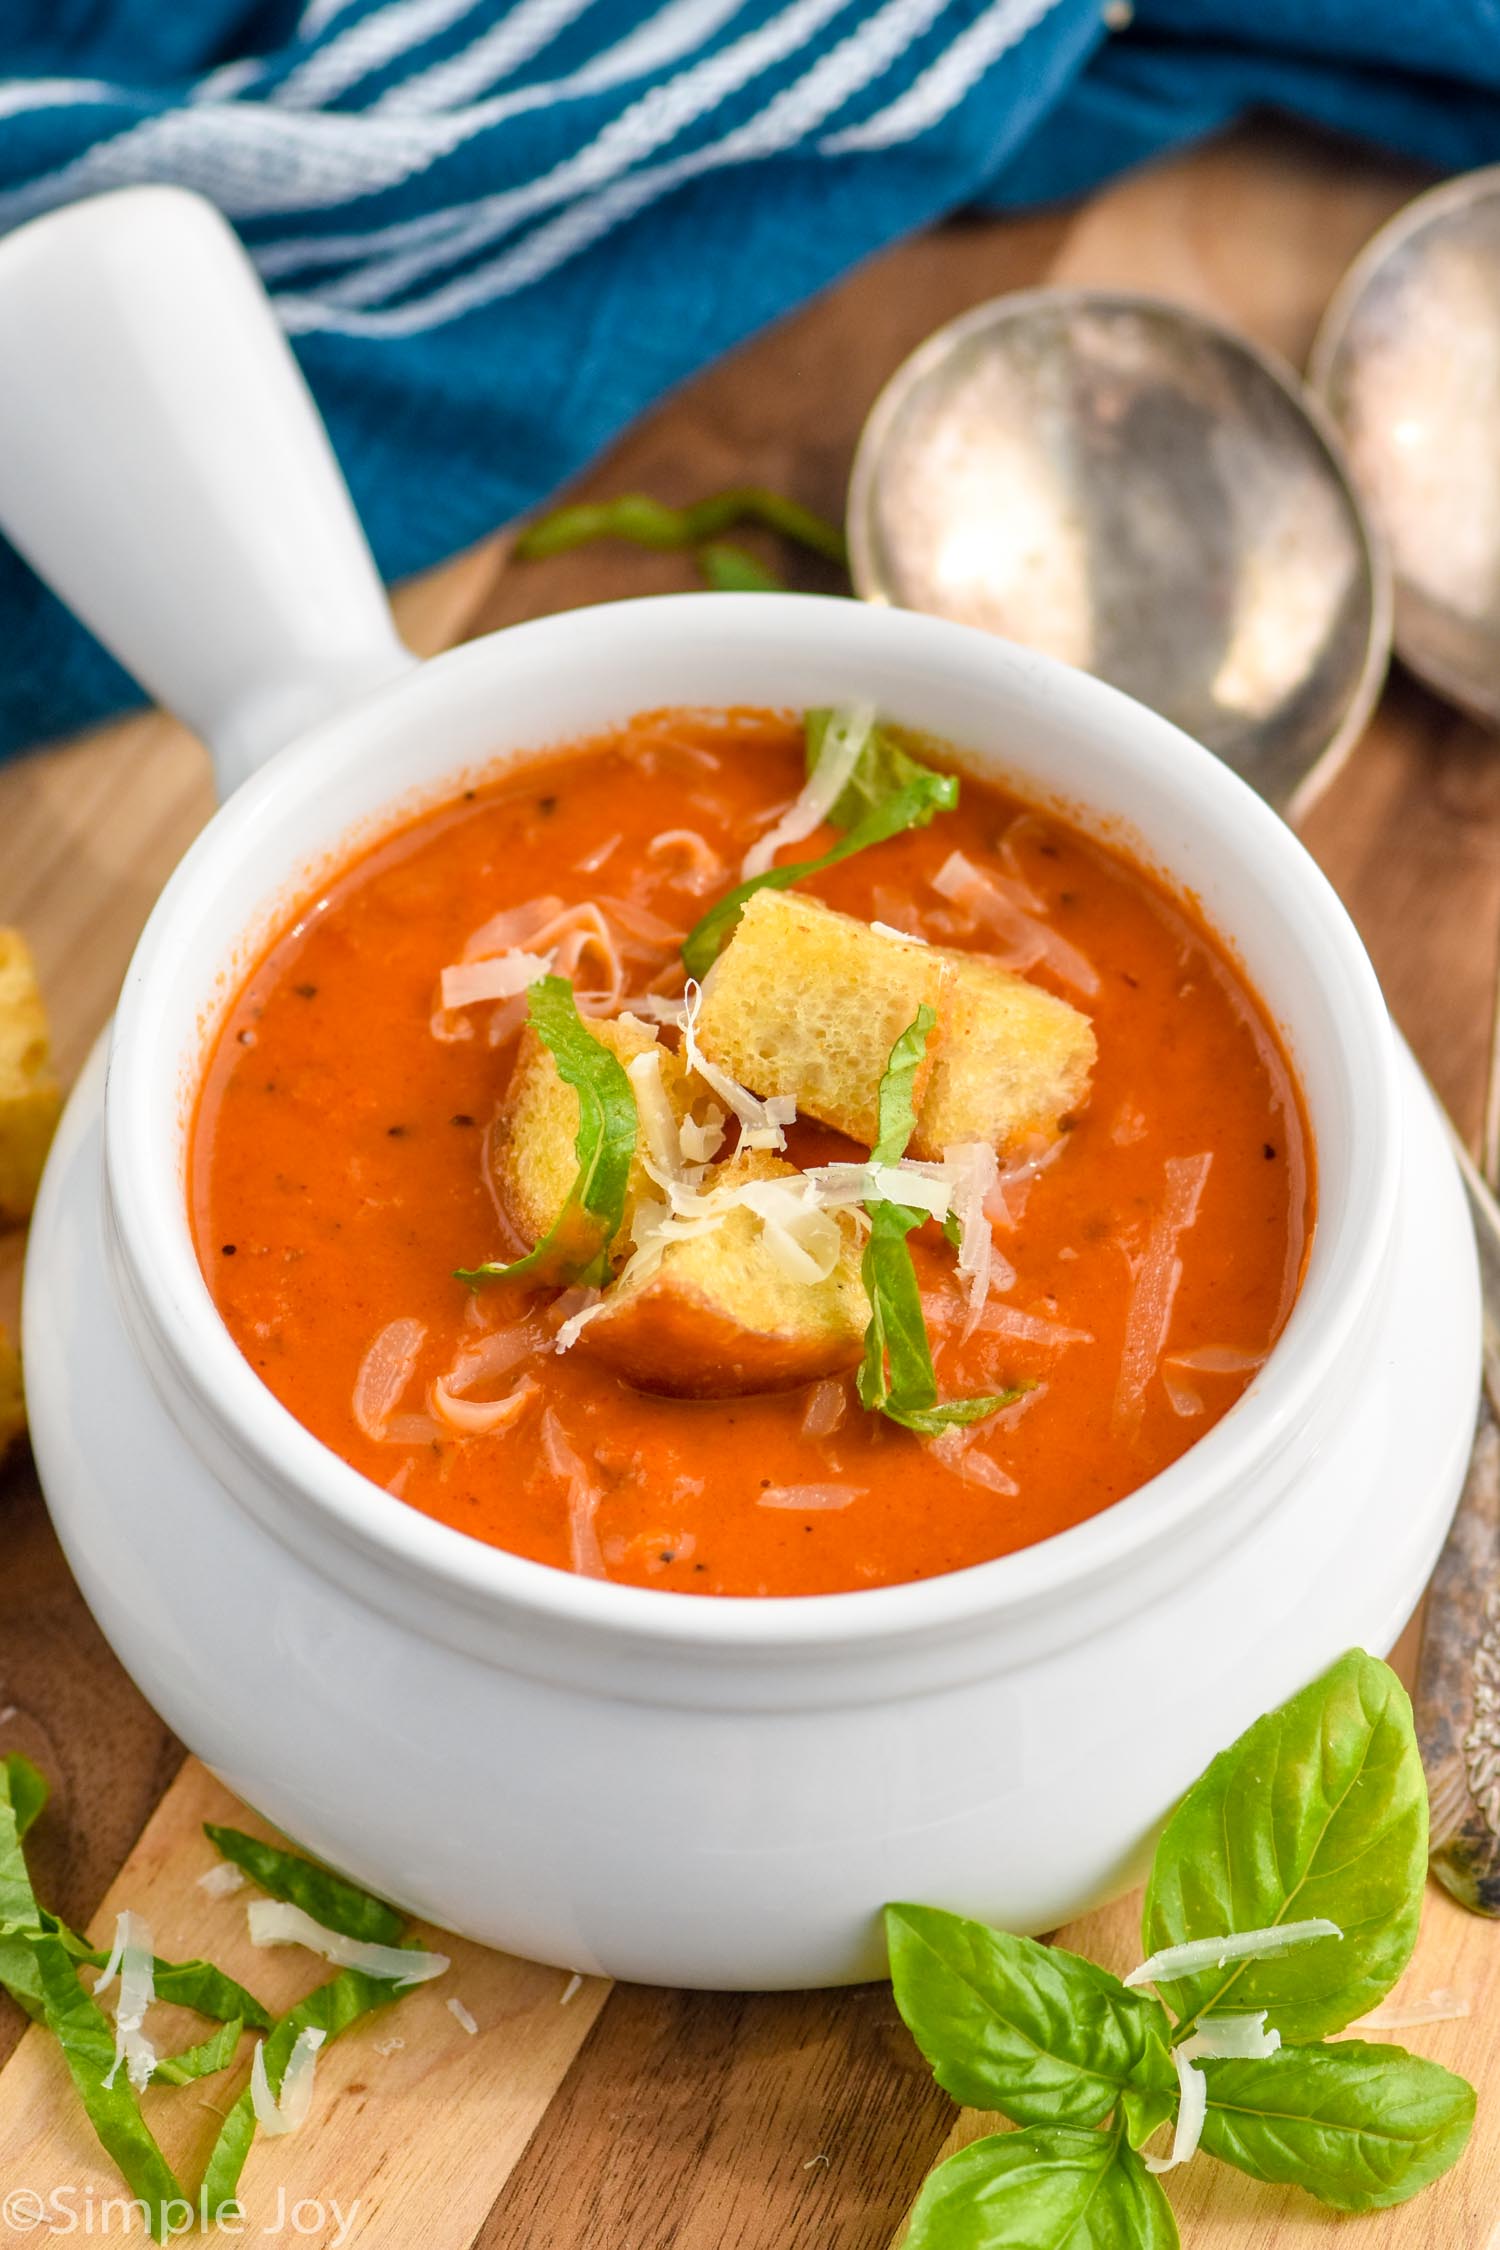 Photo of a bowl of soup garnished with Croutons